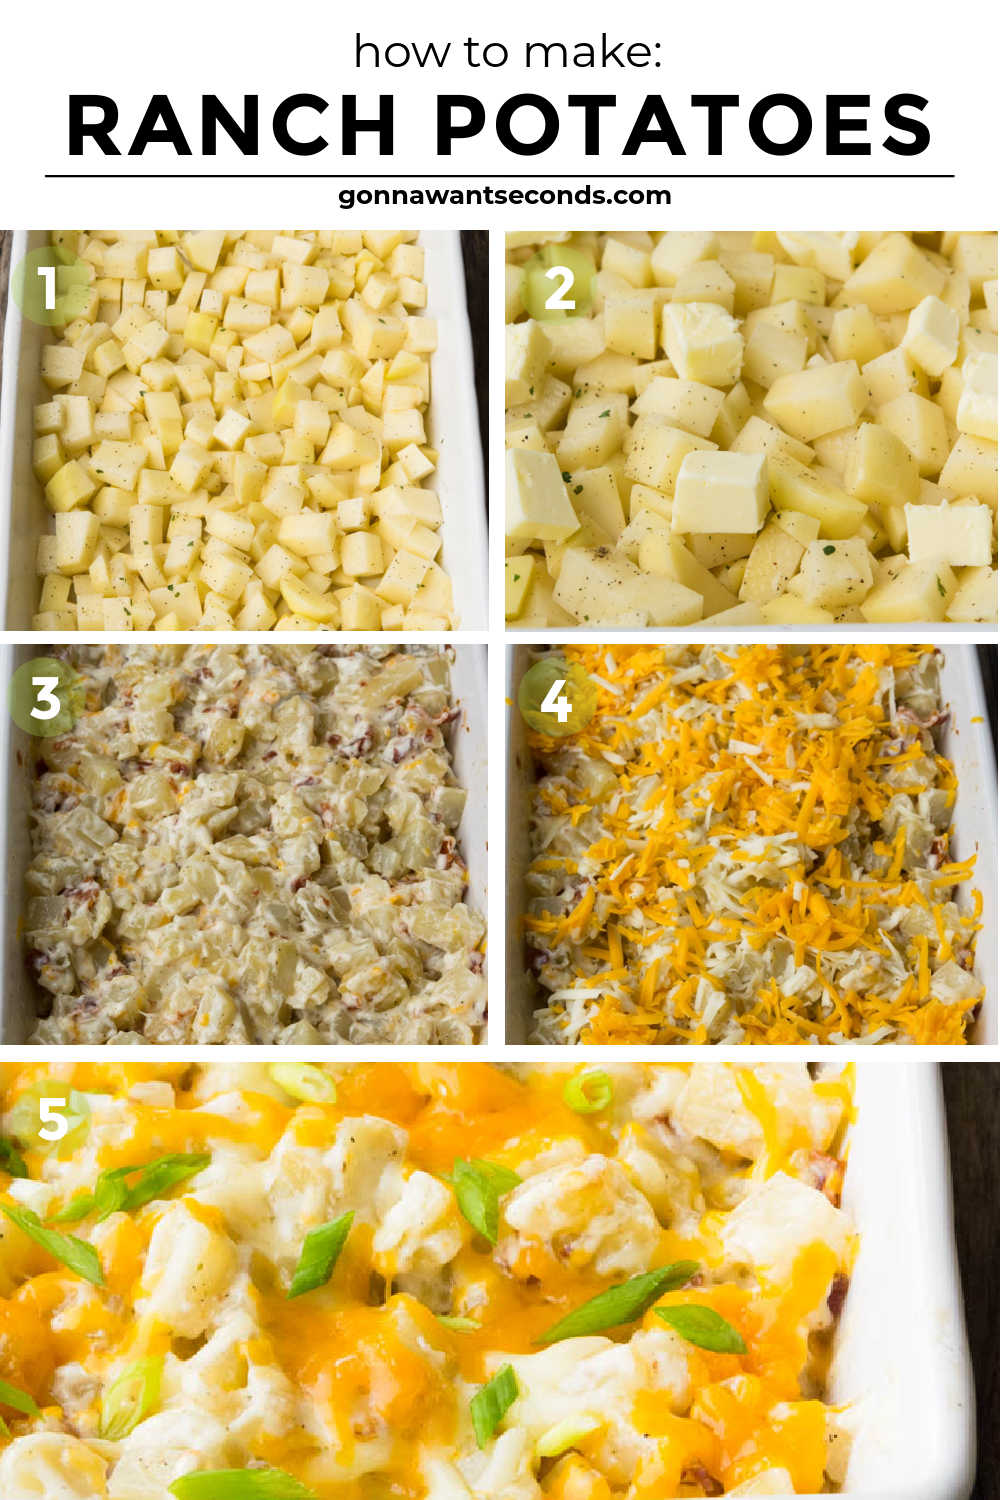 step by step how to make ranch potatoes 